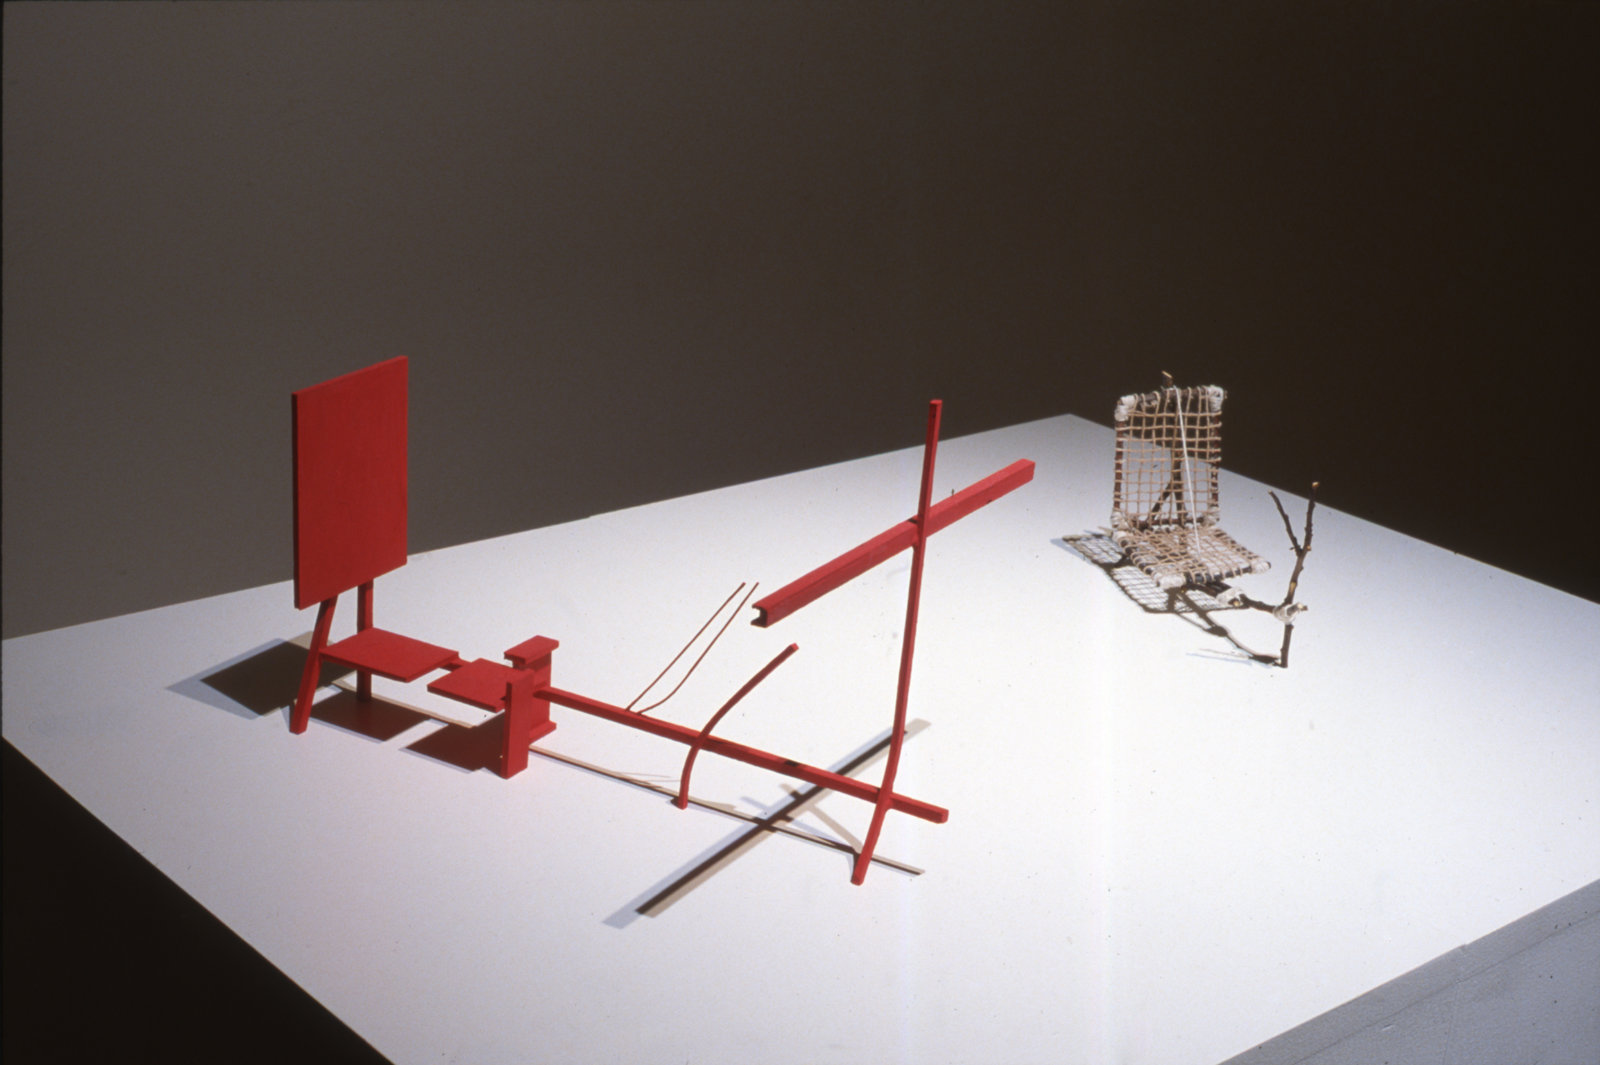 Damian Moppett, 1815/1962, 2003, DVD, large trap, tools, drawing, poster, balsa wood, gesso, tempera, twigs, string, oil paint, dimensions variable